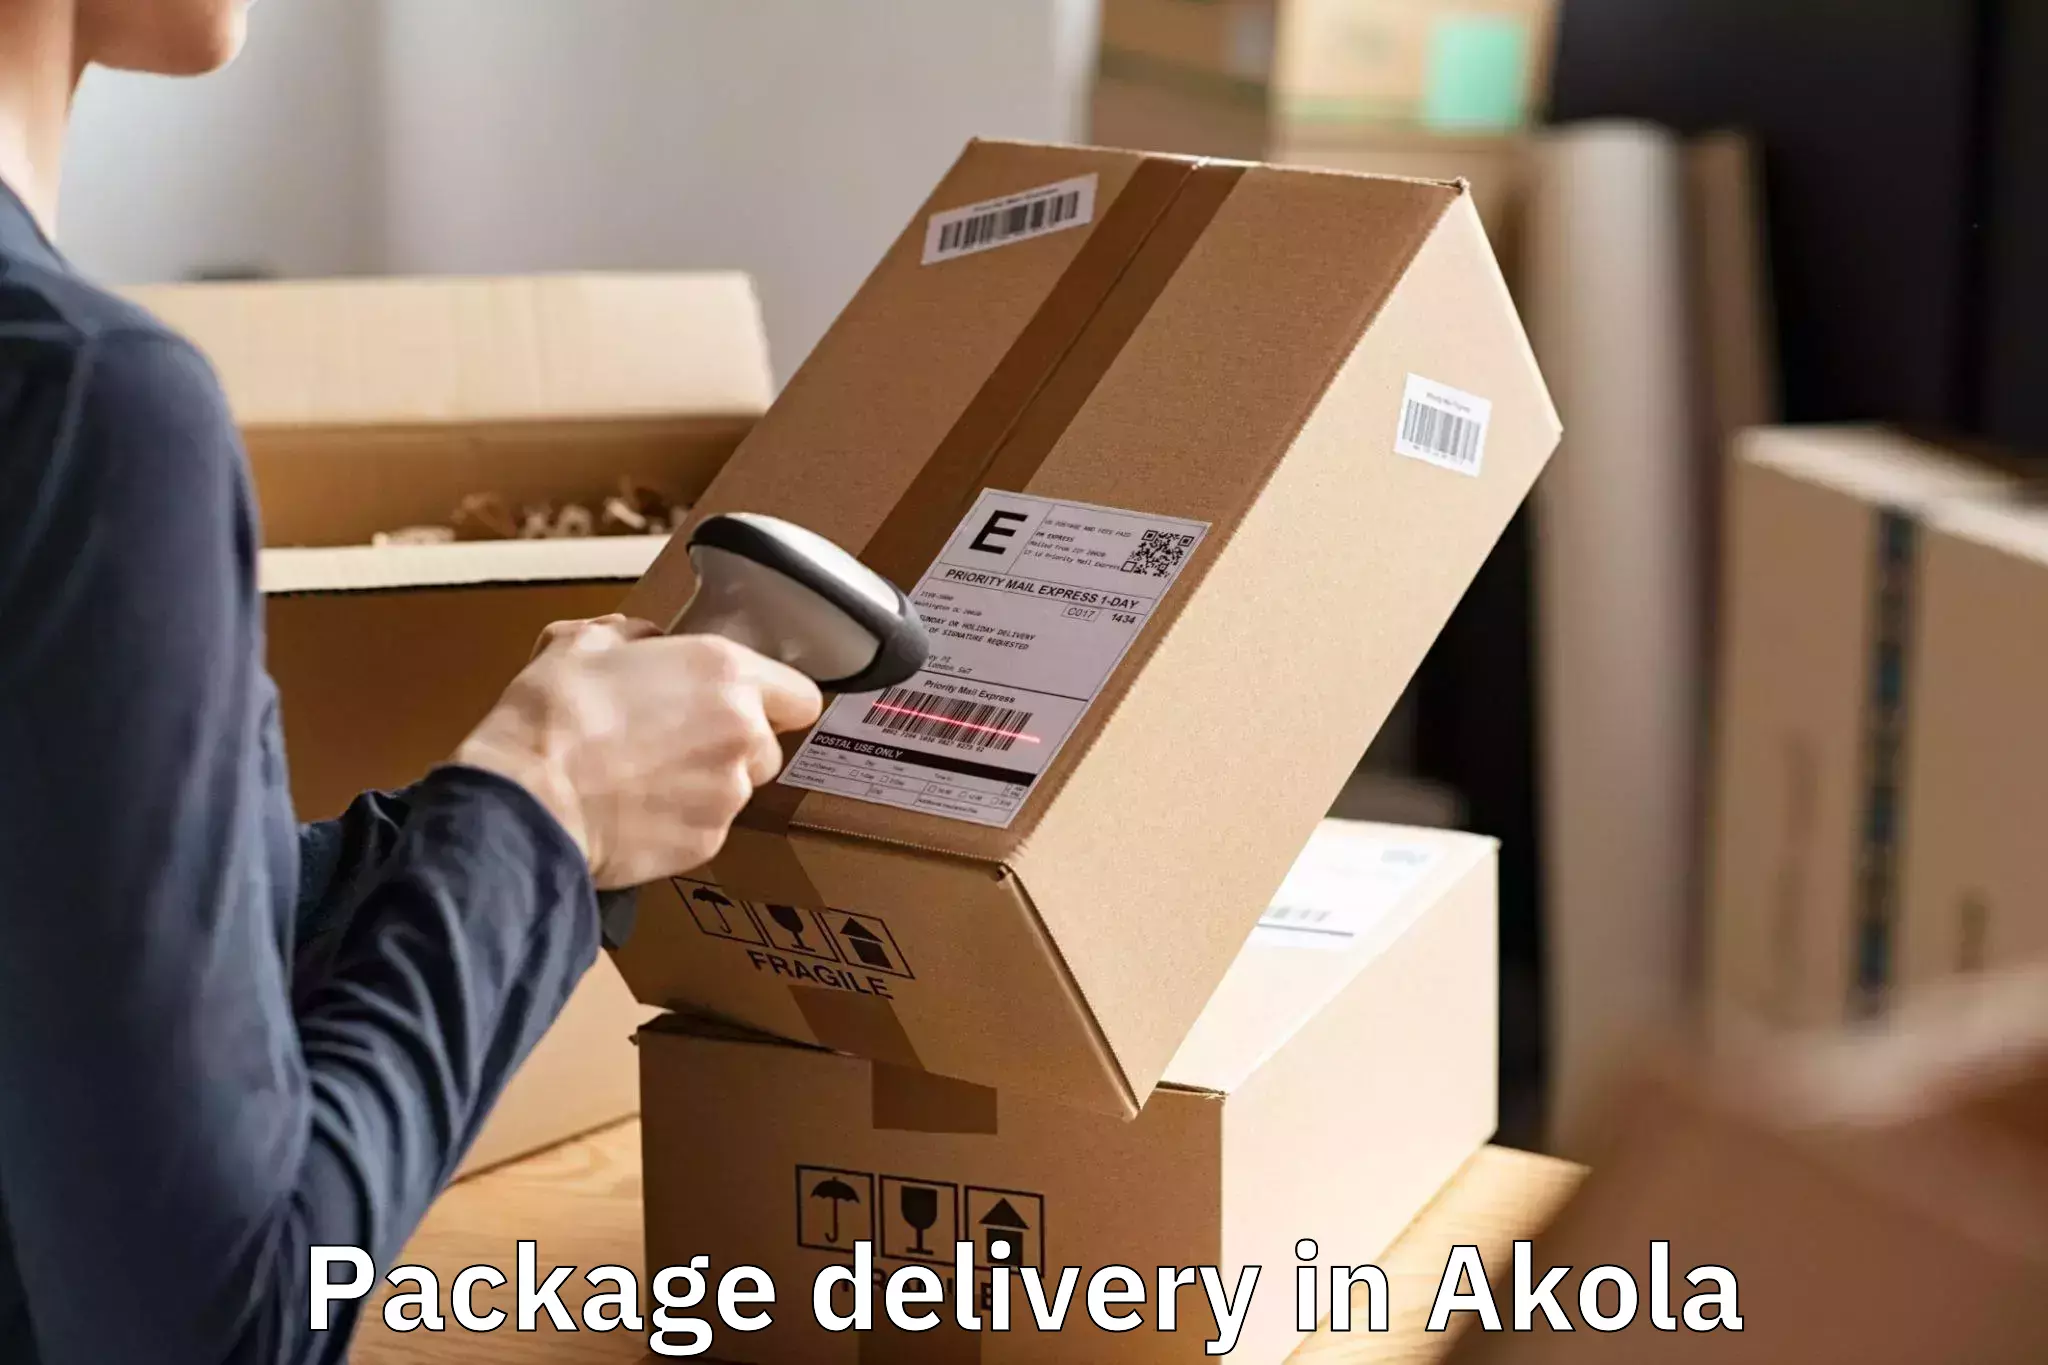 Comprehensive Package Delivery in Akola, Maharashtra (MH)